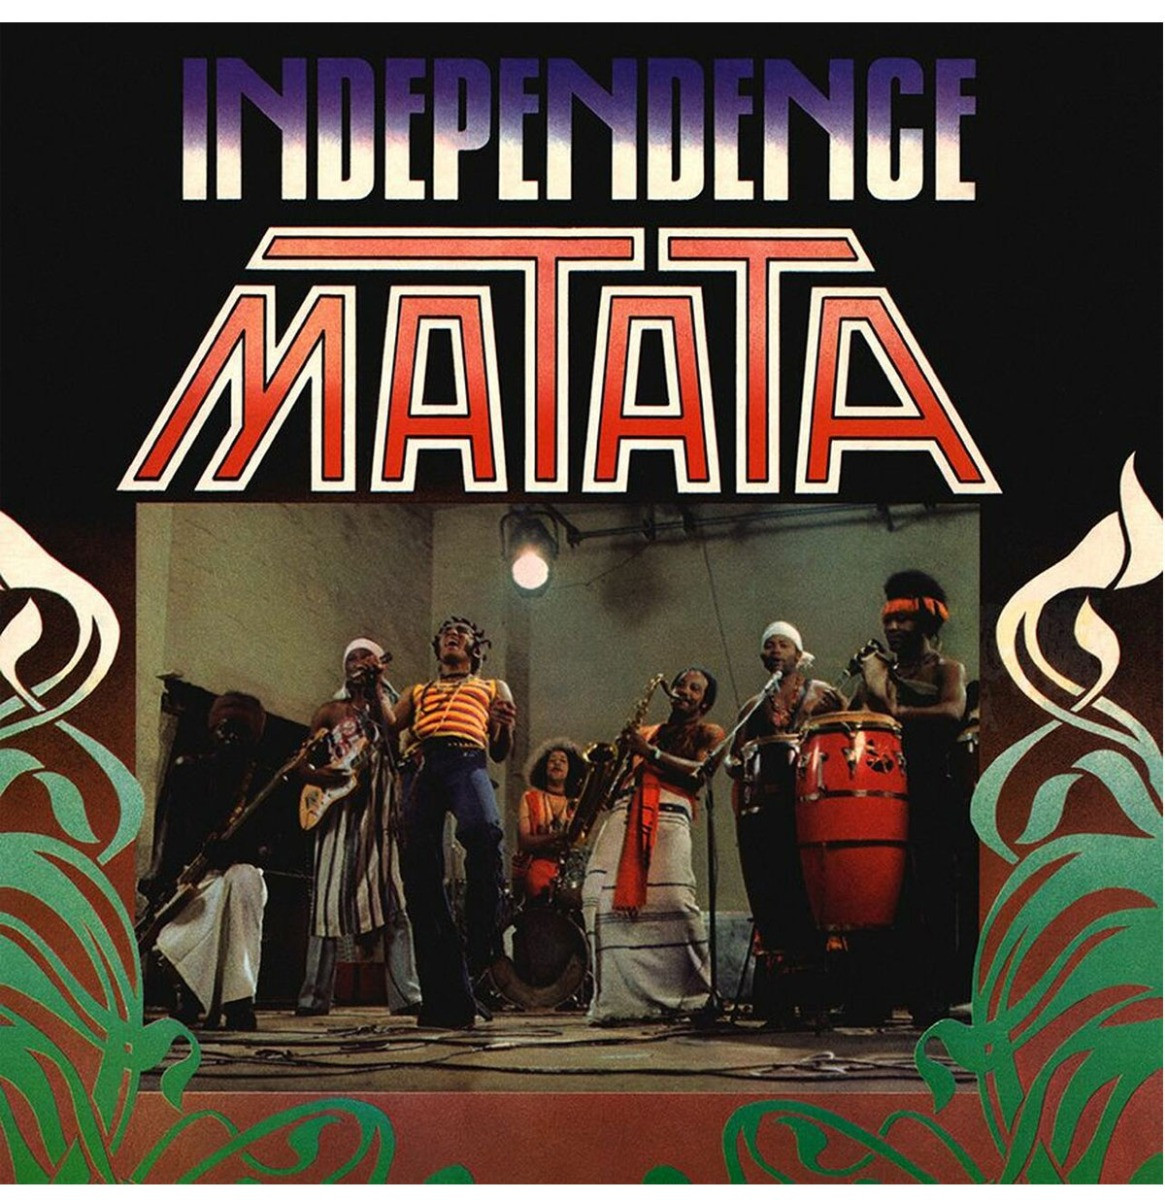 Matata - Independence LP (Record Store Day Black Friday 2021)